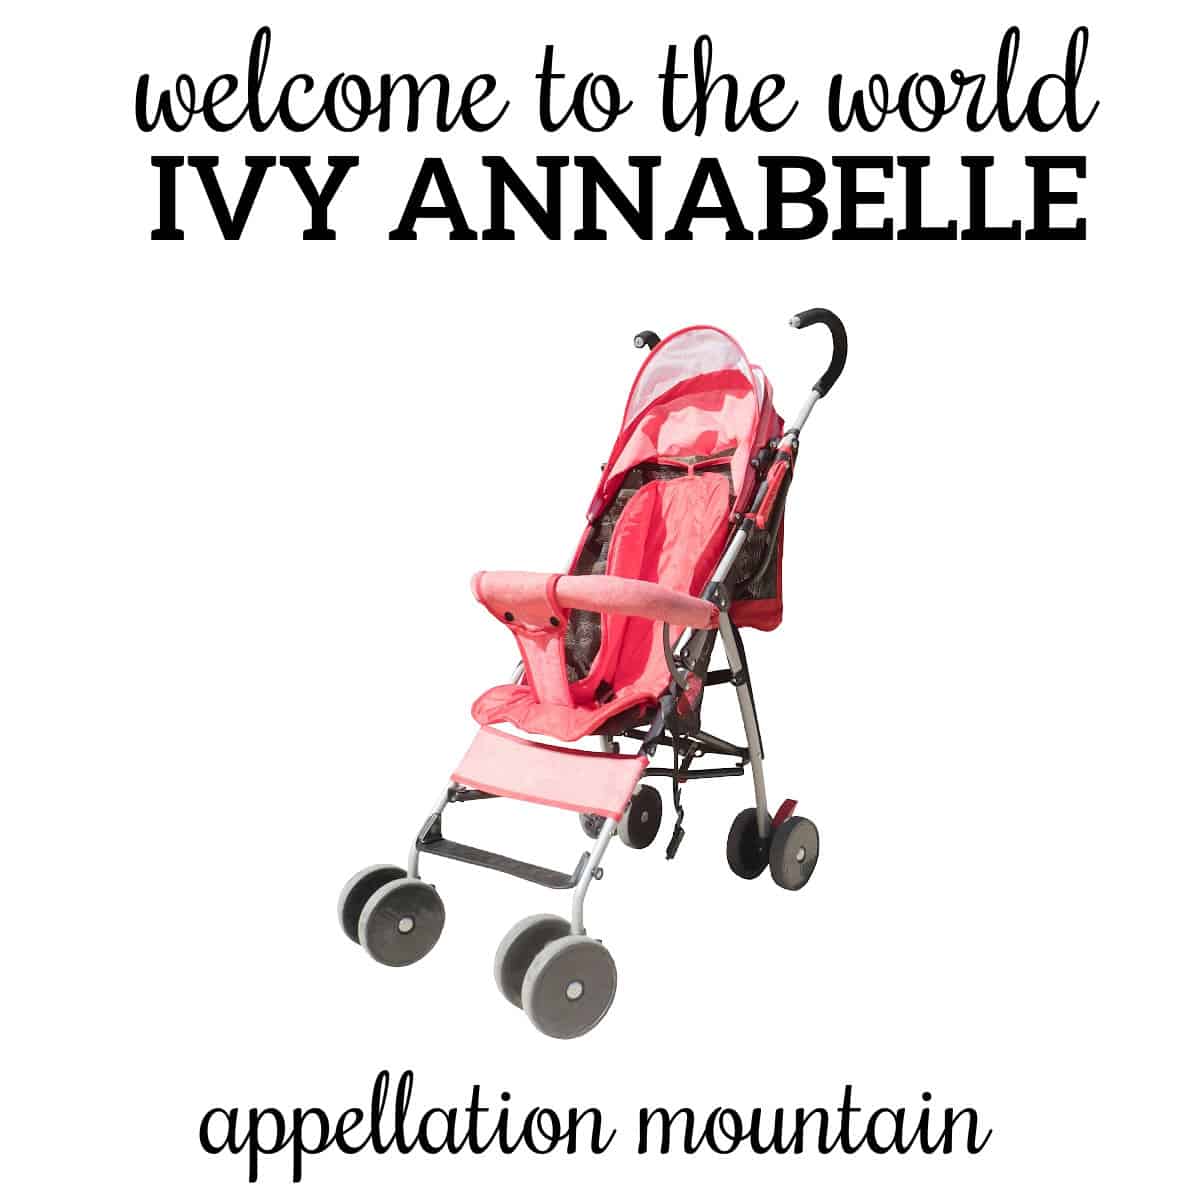 Welcome Ivy Annabelle